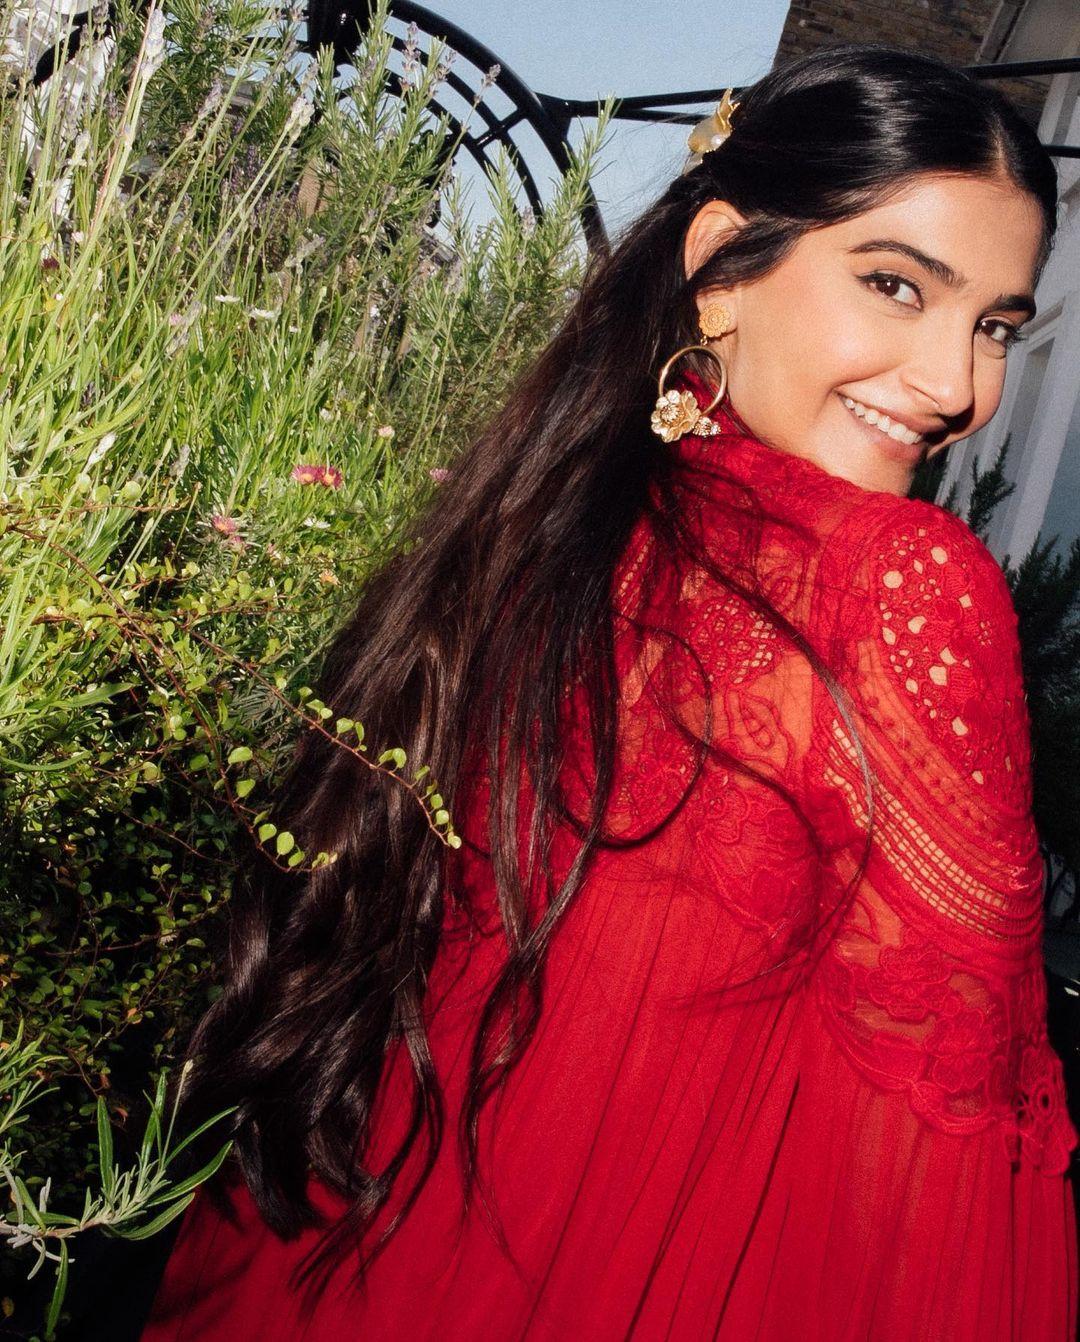 Sonam Kapoor's birthday outfit is perfect for Diwali. She wore a stunning ruby red dress from the Greek designer Christos Costarellos' brand, Costarellos. This dress is made of silk chiffon with a high neck and beautiful lace embroidery on the upper half of the bell sleeves and above the bust.